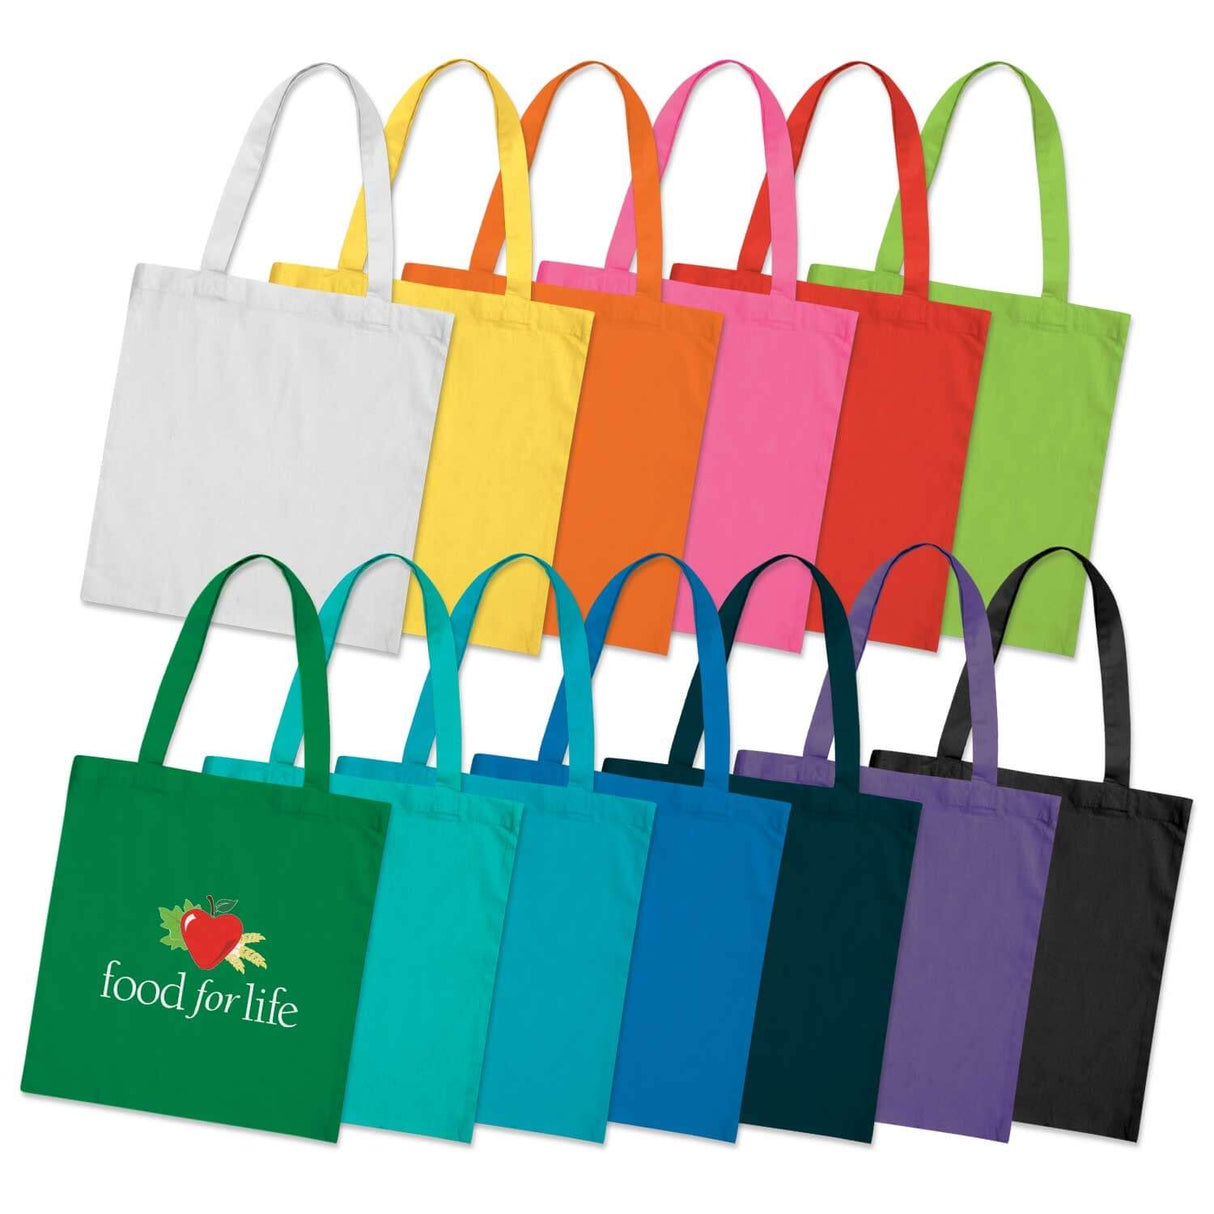 Cotton Tote Bag Colours - Printed